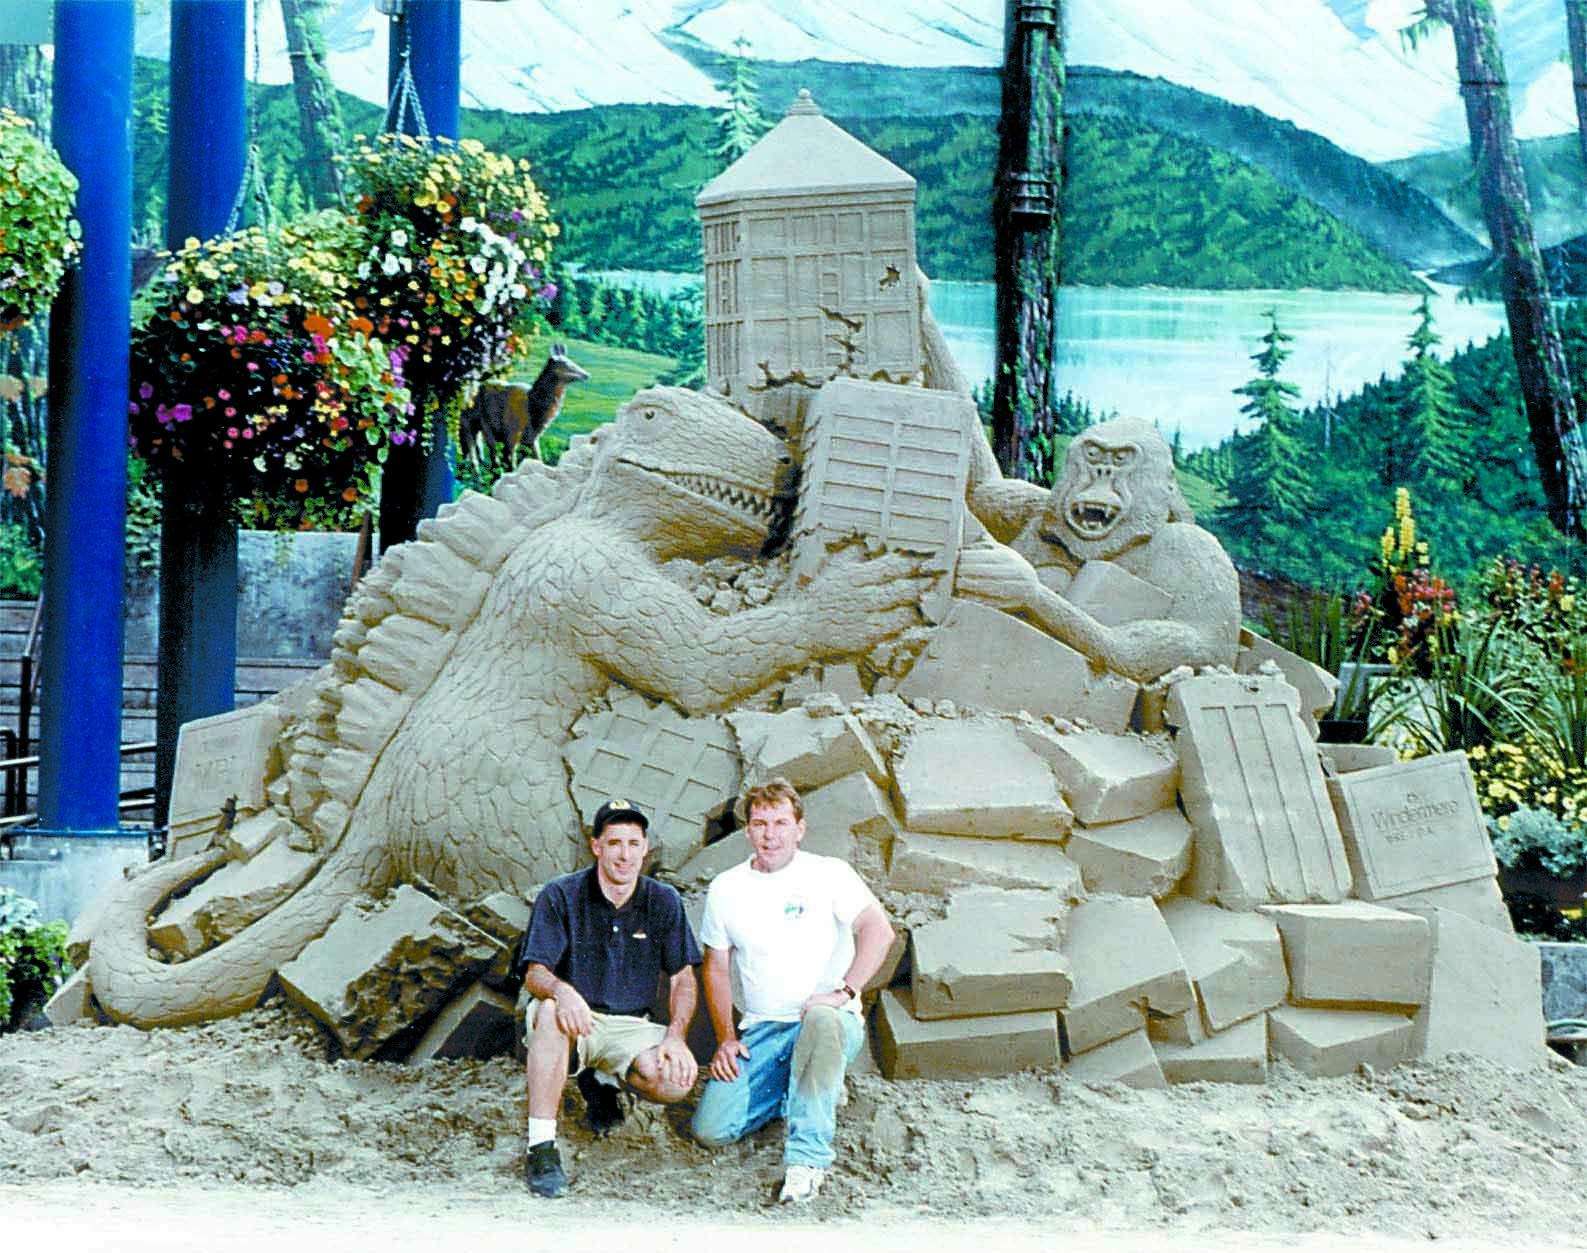 Sand sculptors Andrew Briggs of Victoria and Charlie Beaulieu of Kingston sit in front of their sand sculpture of Godzilla and King Kong at the Conrad Dyar Memorial Fountain in downtown Port Angeles in this August 2001 file photo. Keith Thorpe/Peninsula Daily News